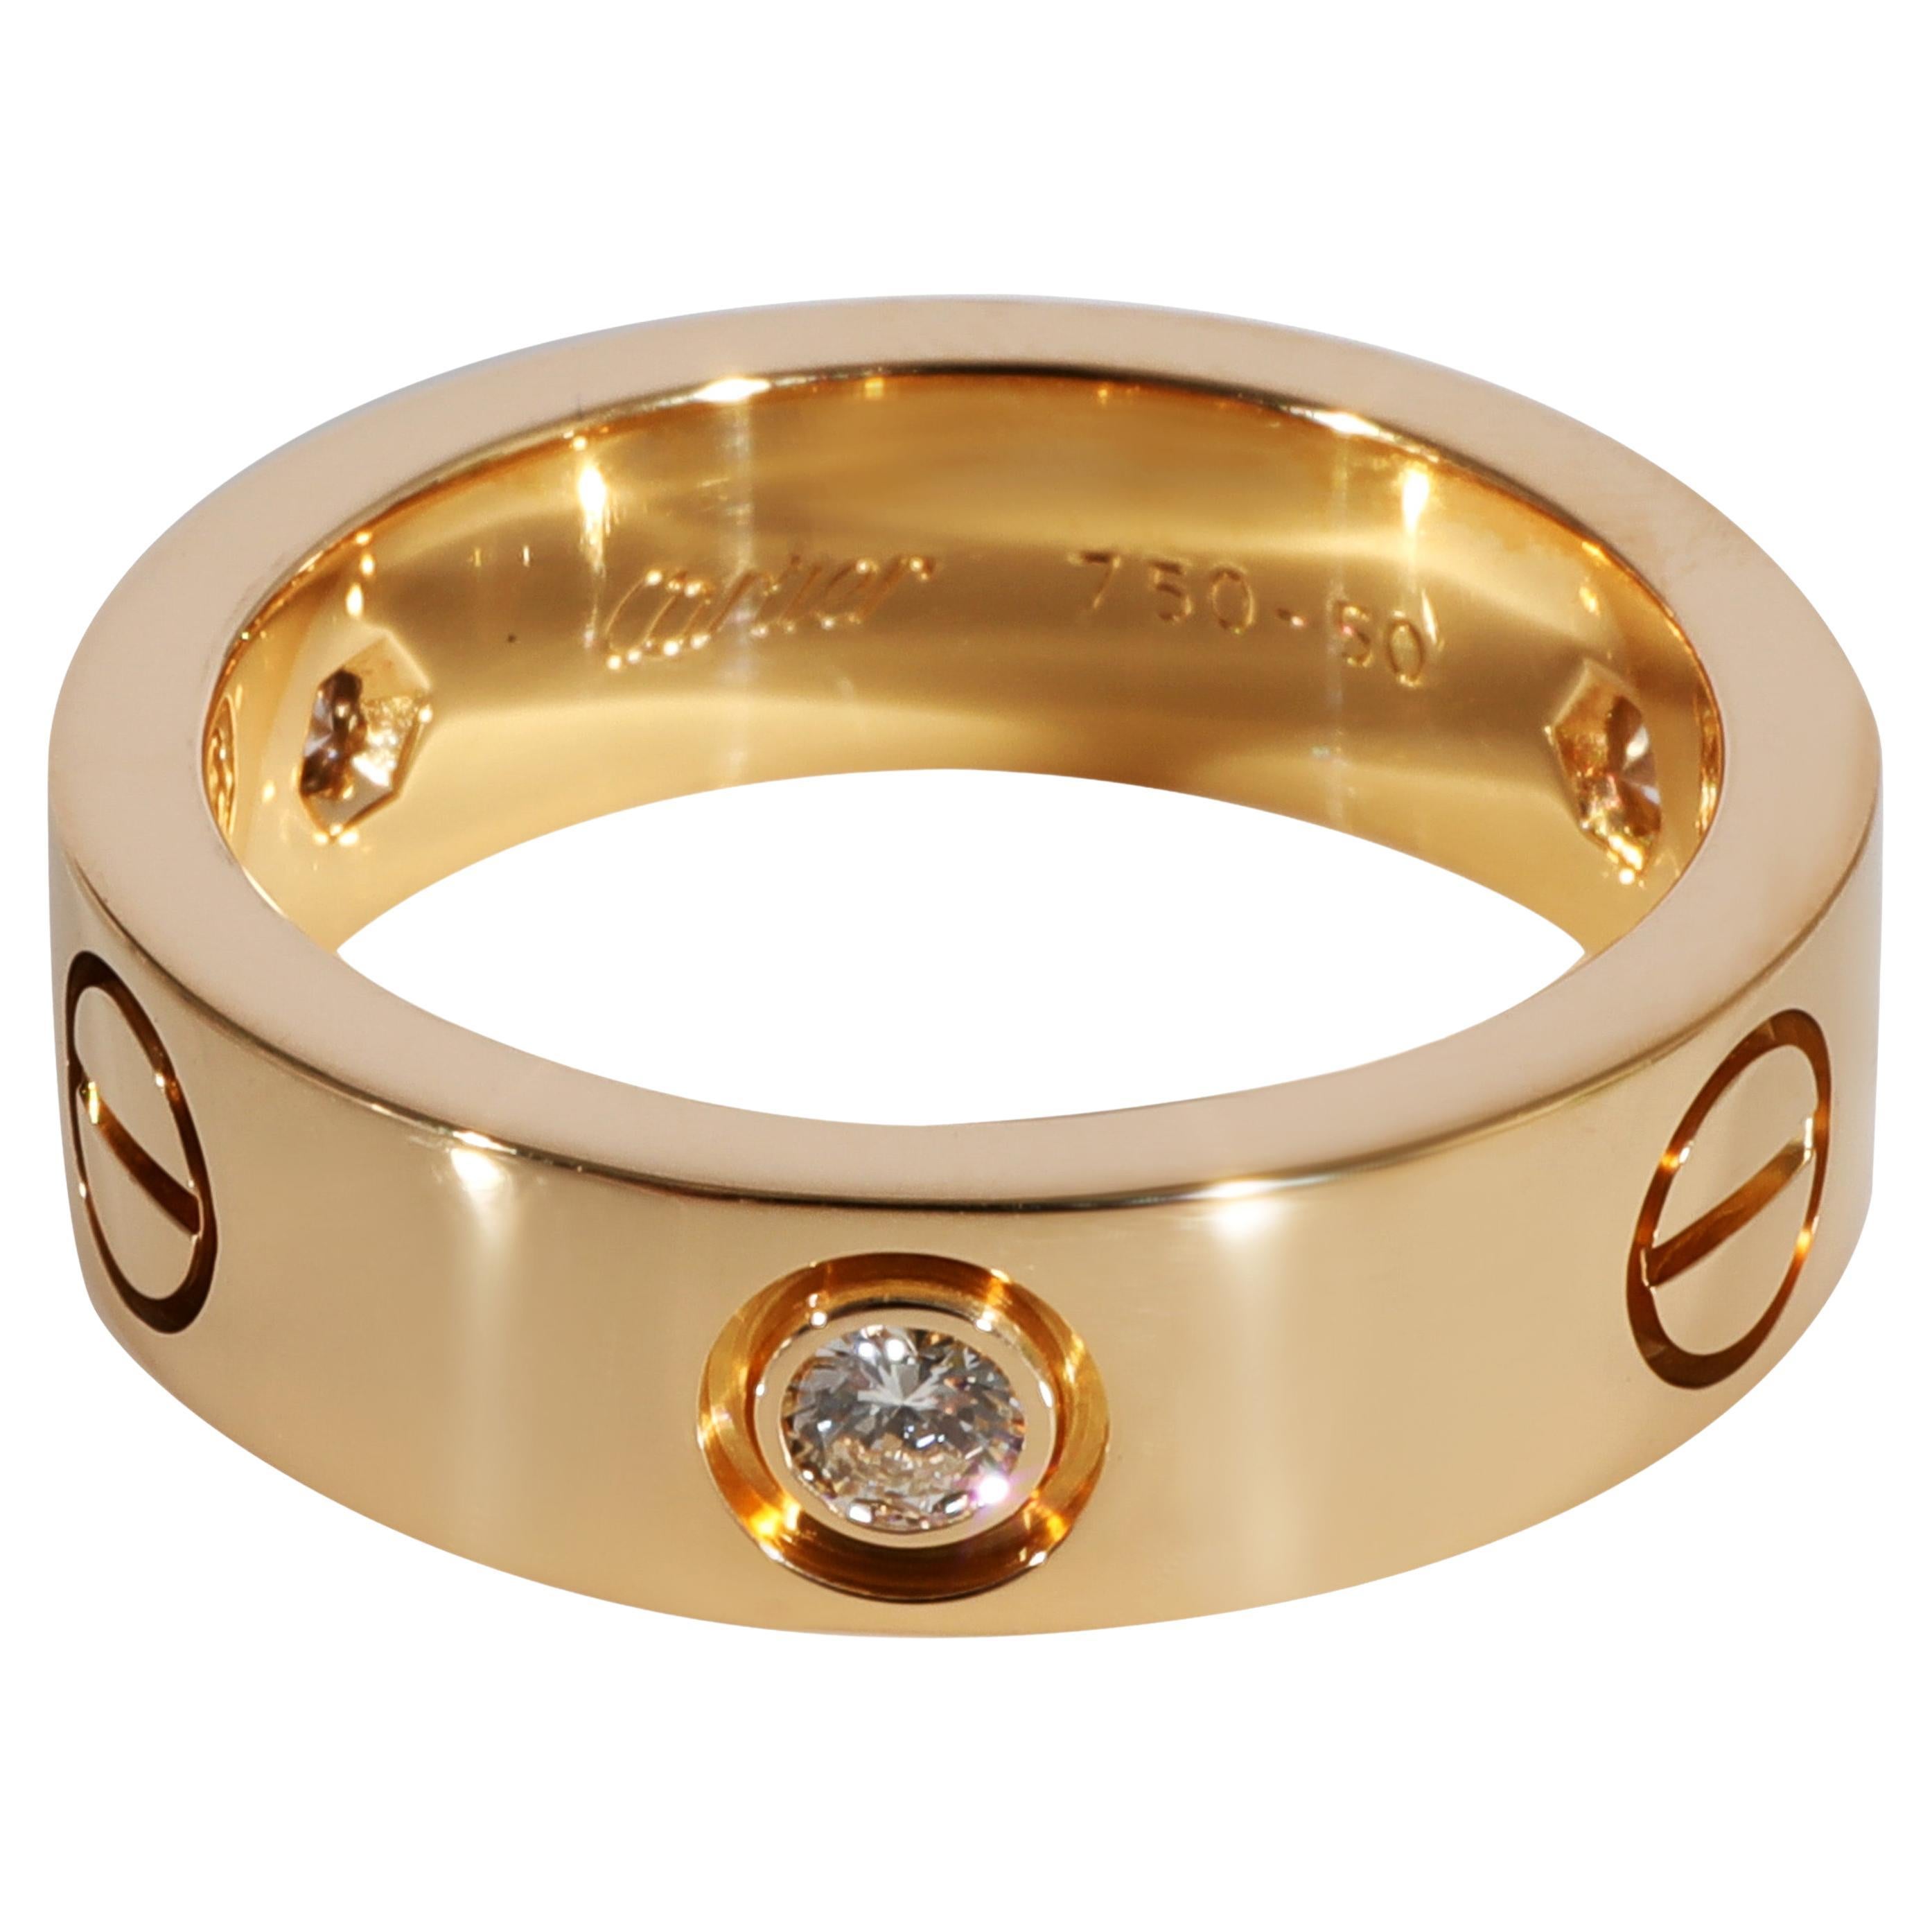 Cartier Love Diamond Ring in 18k Yellow Gold 0.22 CTW For Sale at 1stDibs |  crd 083750, cartier 760 ring, cartier crd 083750